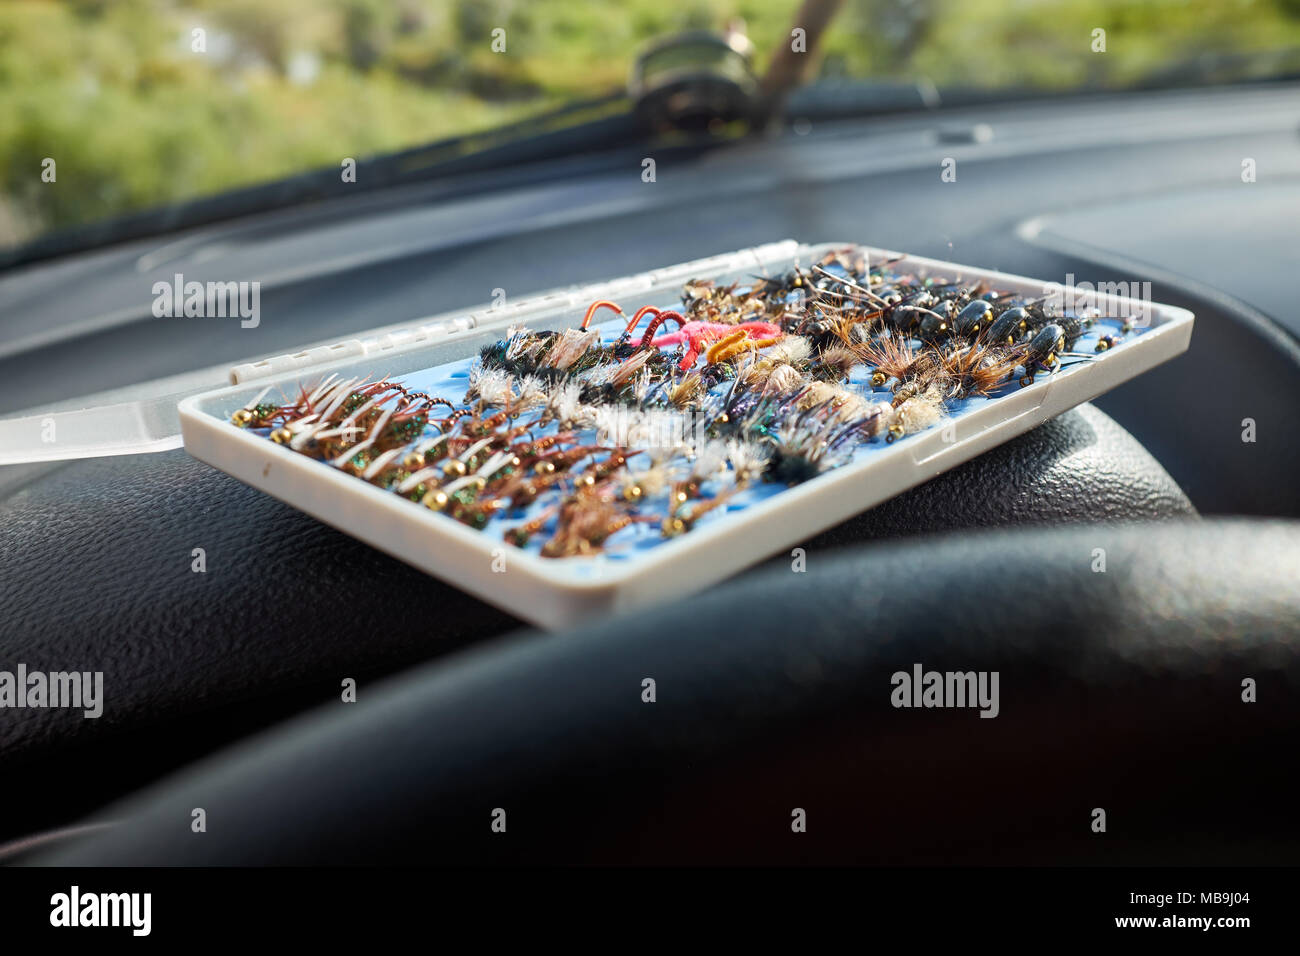 Opened box of specialist flies for fly fishing inside a car with a